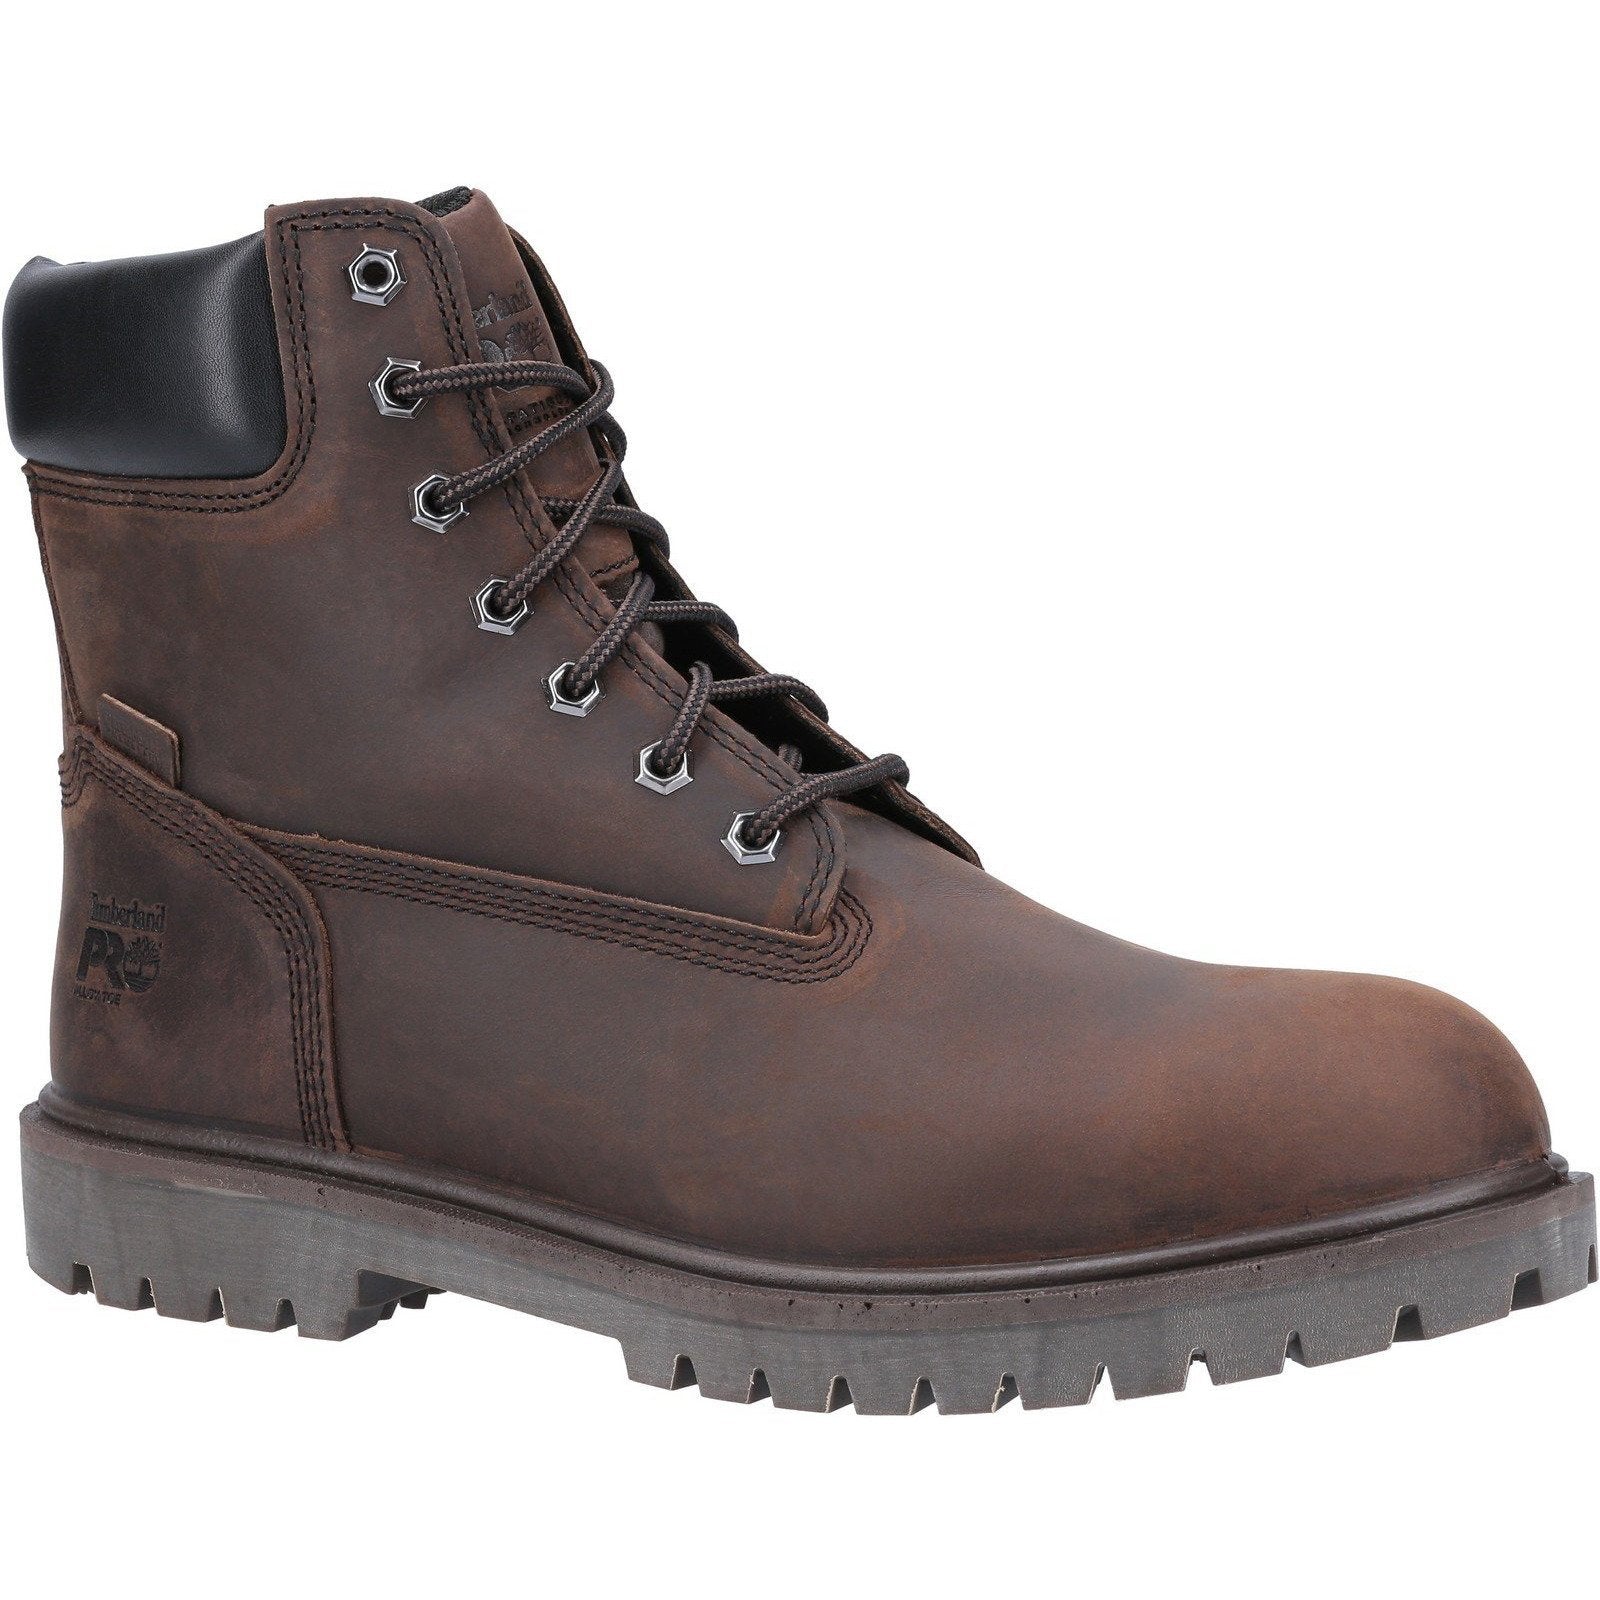 Timberland Pro Iconic Safety Work Boot With Toe Cap Brown – WORK +SAFETY